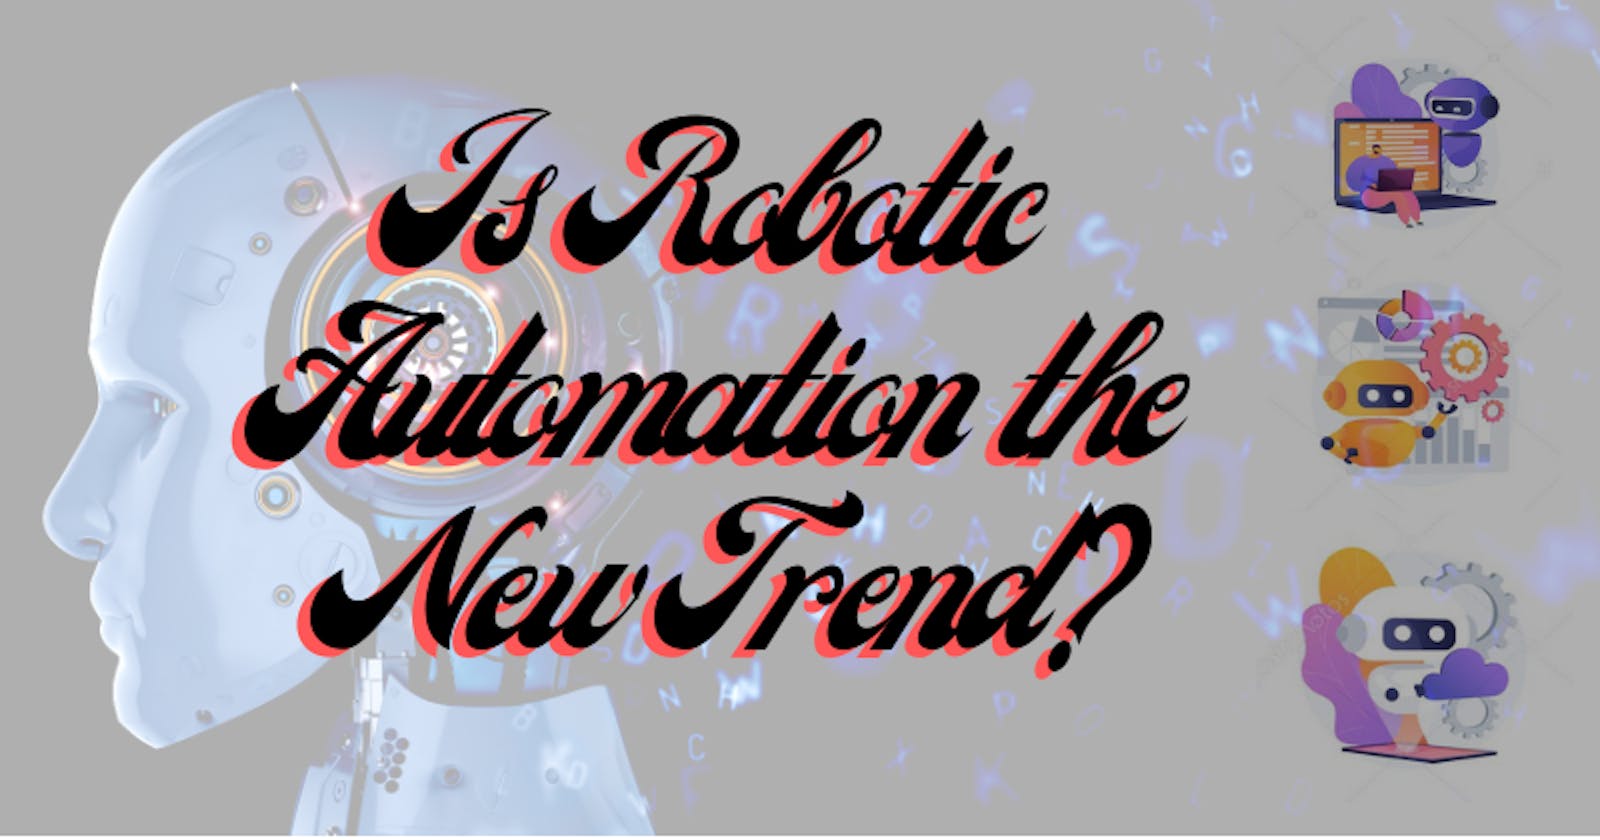 Is Robotic Automation the New Trend?